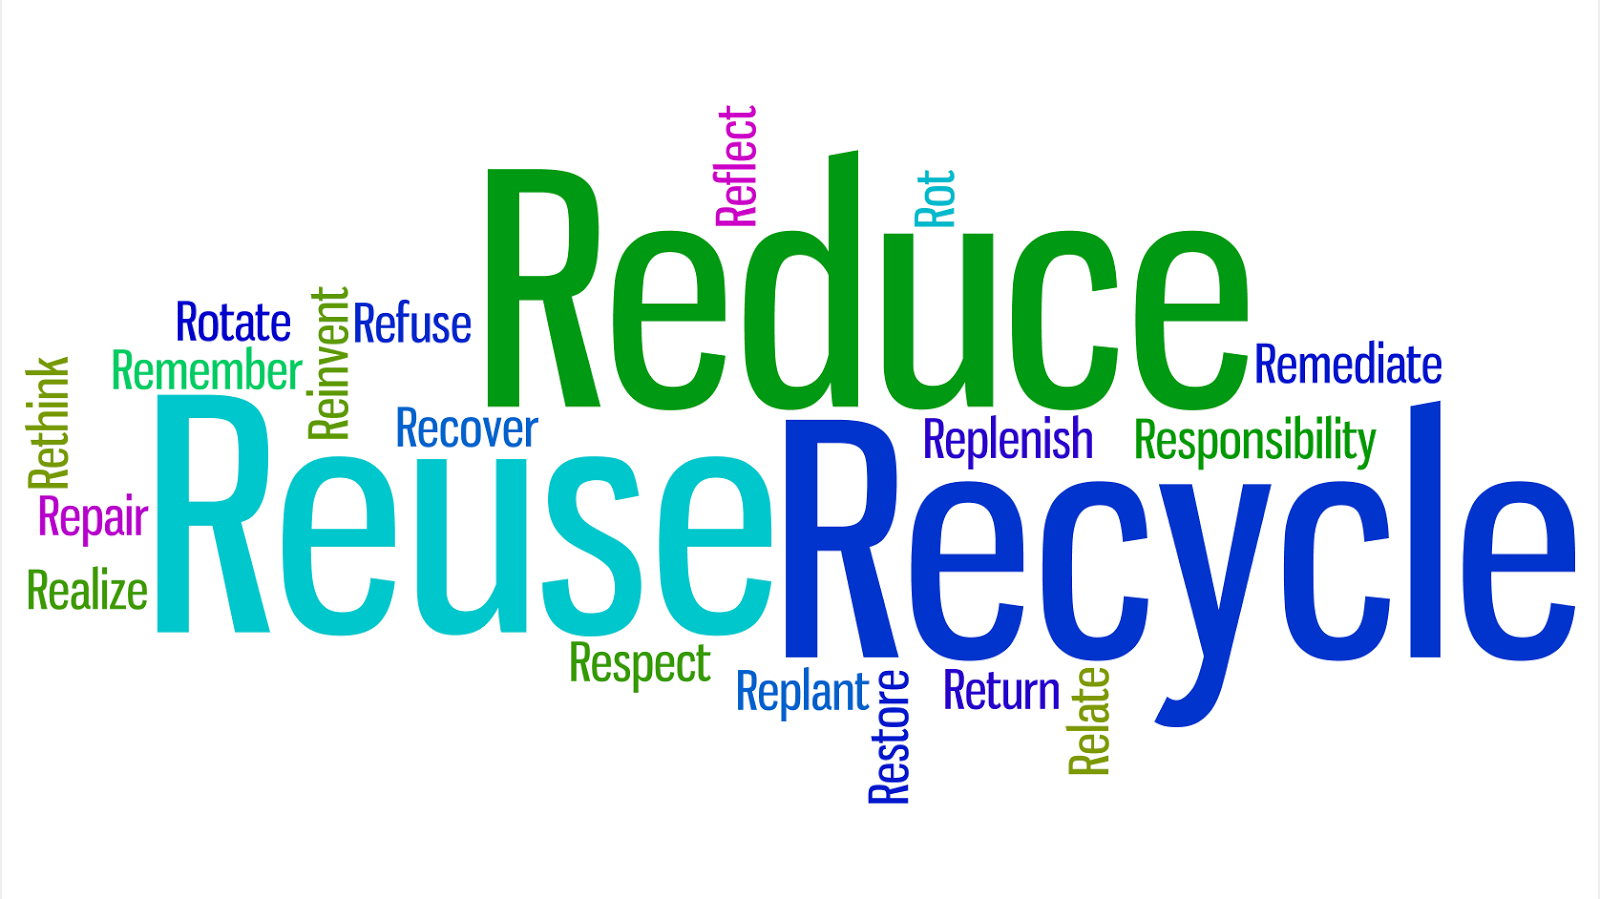 Finding ways to avoid, reduce and reuse waste - Rethink Waste